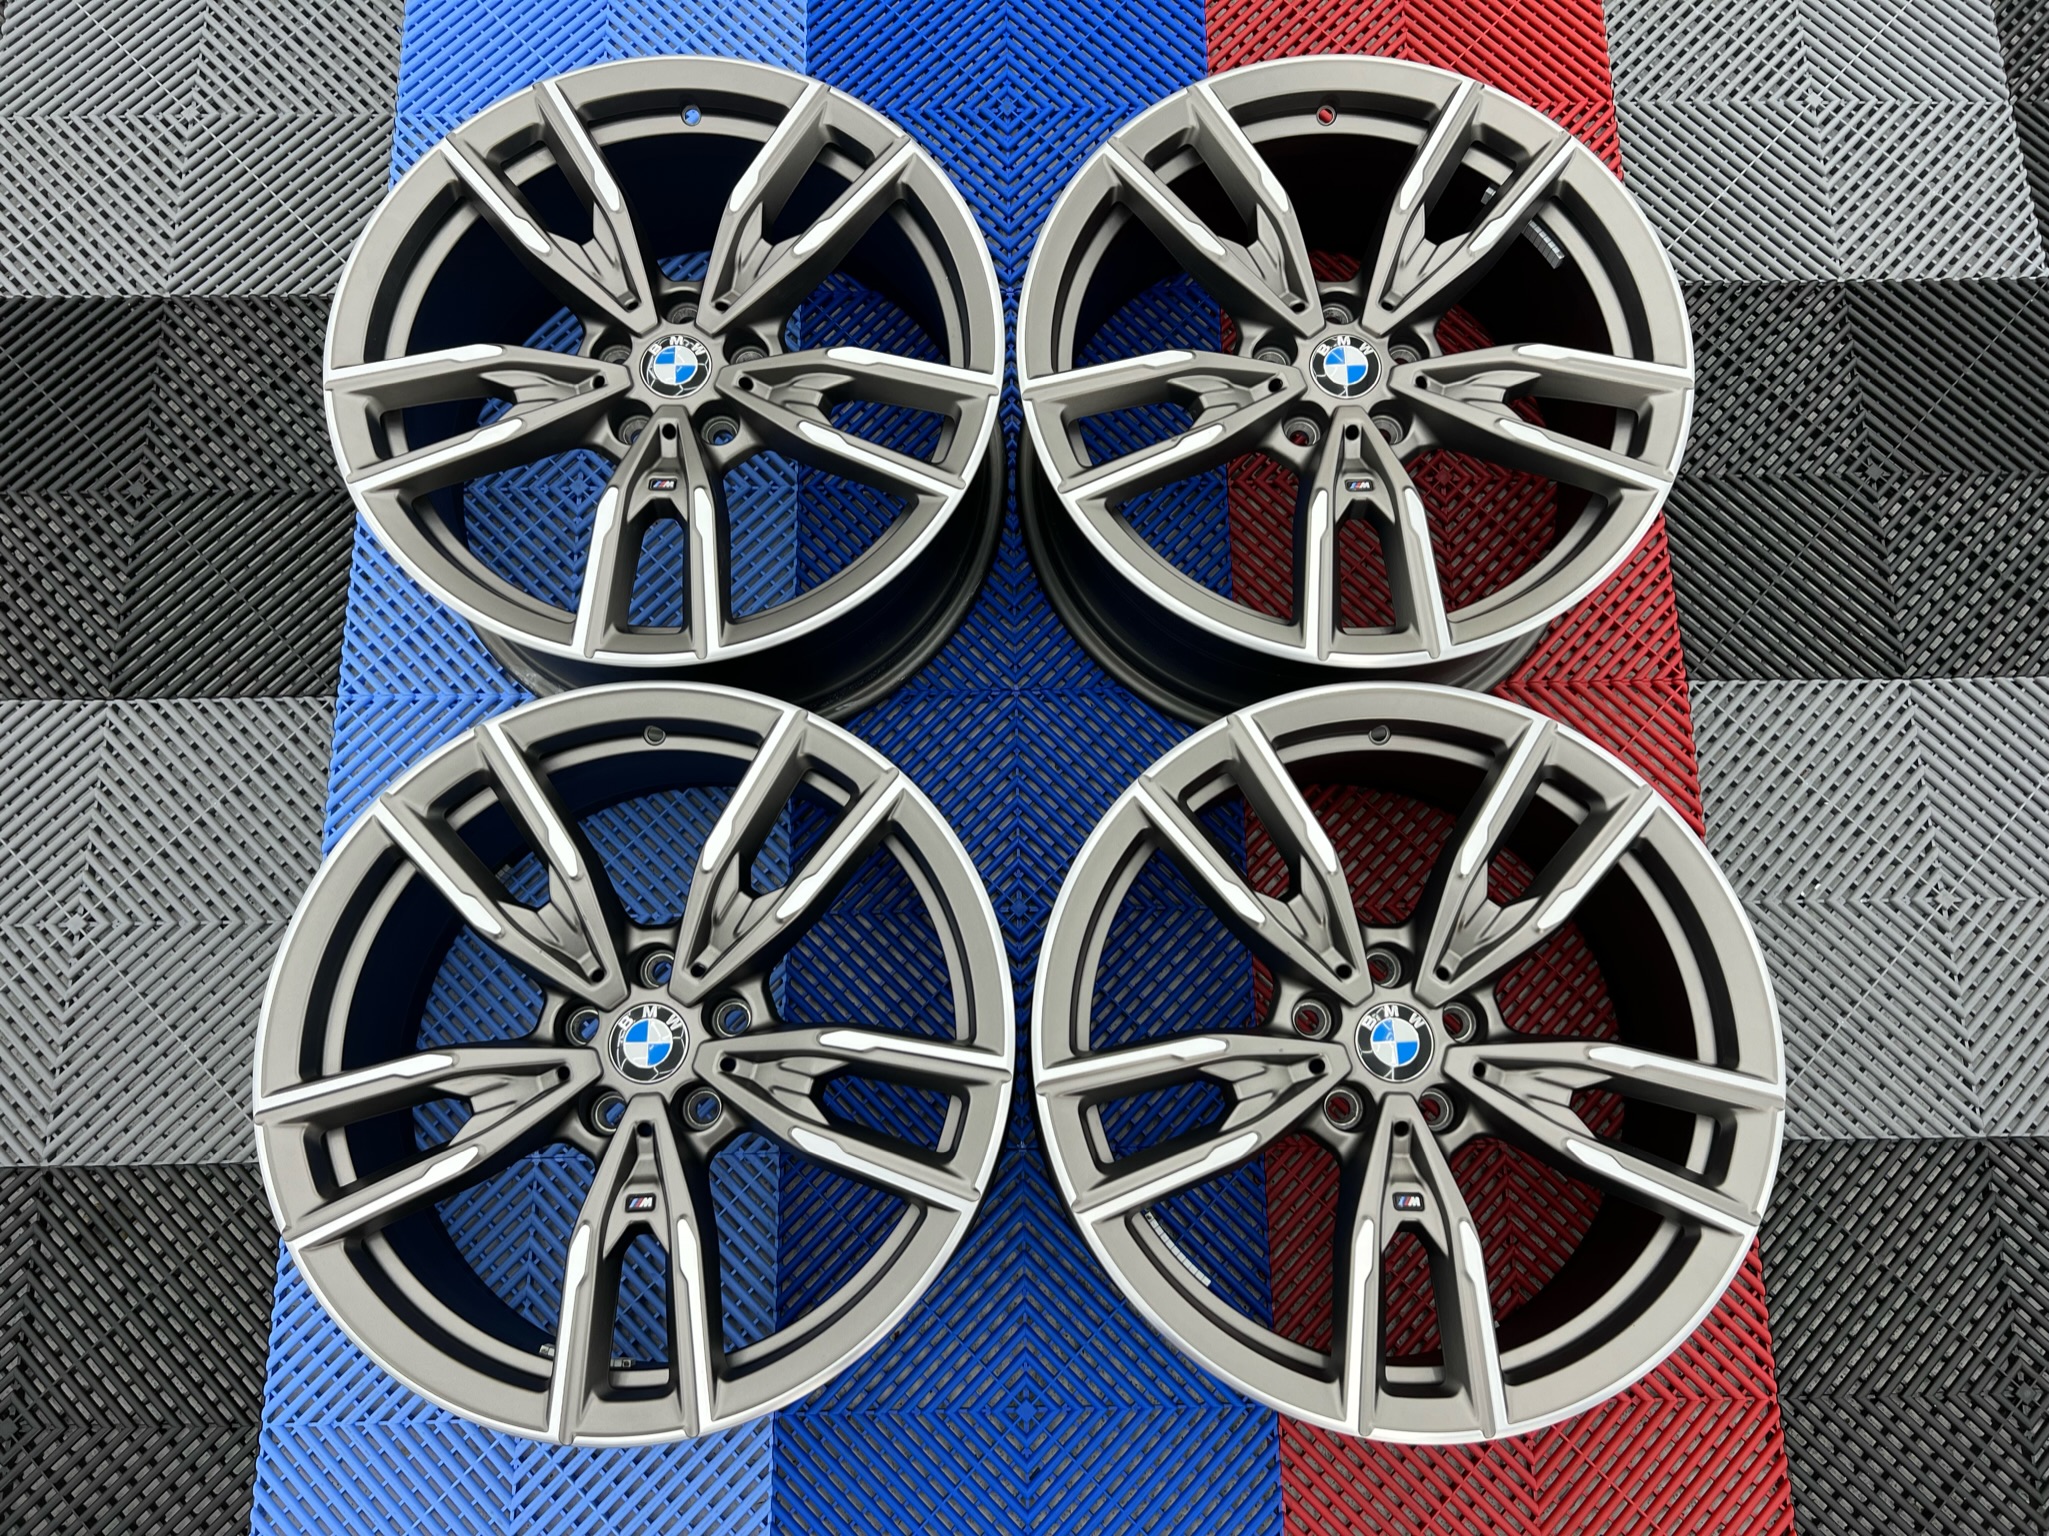 USED 19" GENUINE BMW G20 3 SERIES STYLE 792 M SPORT ALLOY WHEELS, EXCELLENT NEAR UNMARKED,WIDE REAR